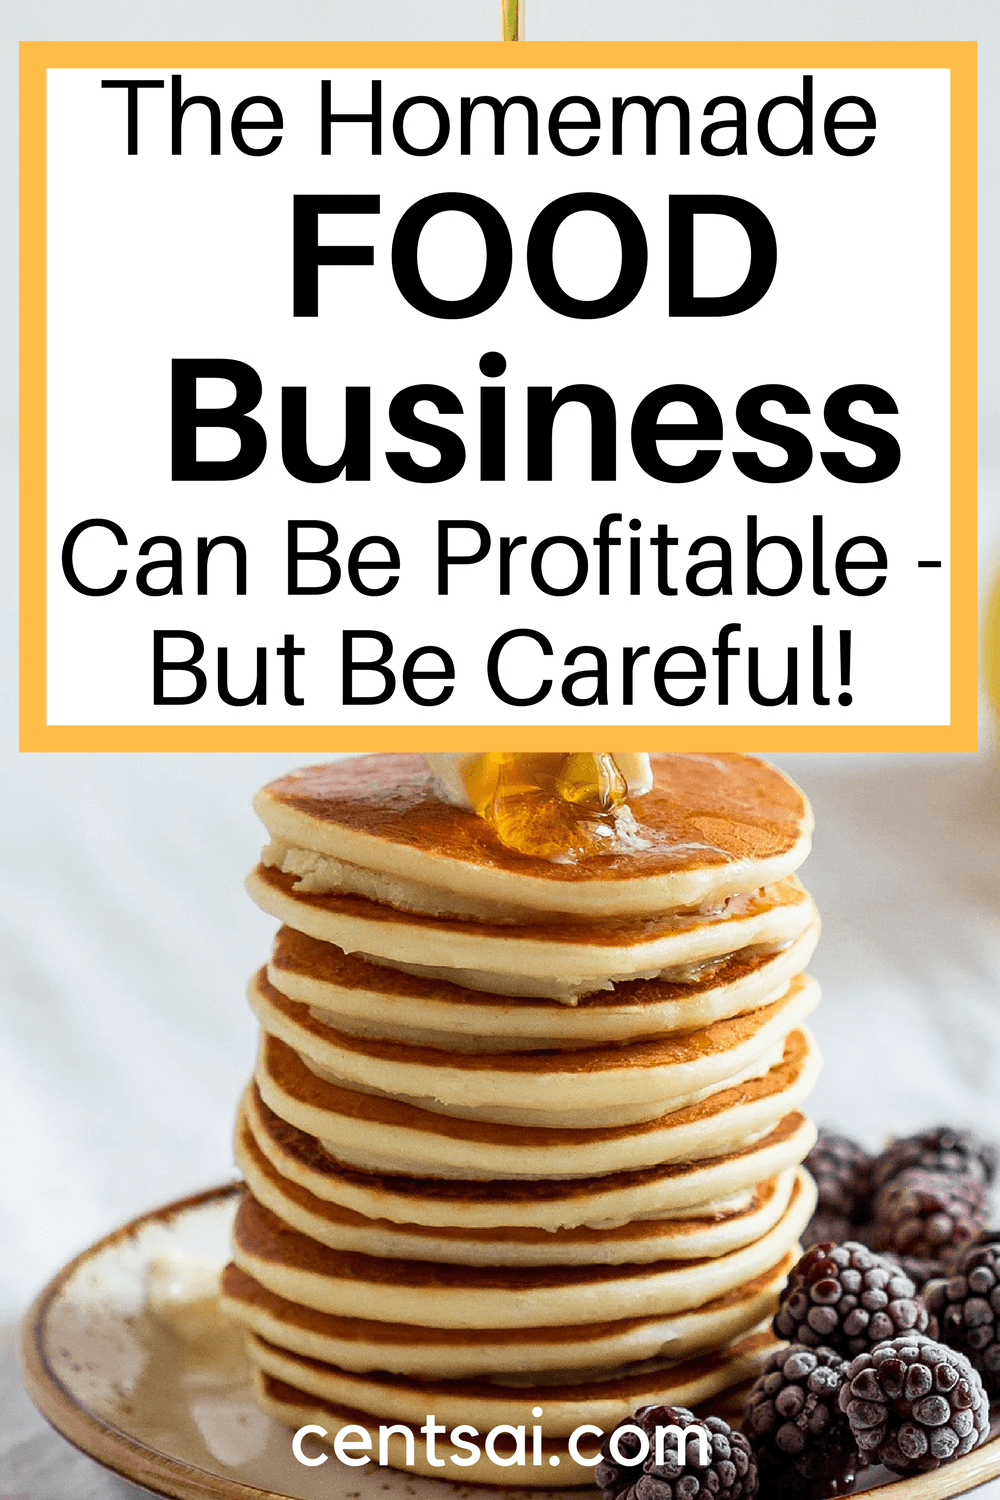 Could you use some extra money? Do you love to cook? Then starting a homemade food business might be just the thing for you. Read up on the perks, pitfalls, and how-tos of this sweet little side hustle, and cook your way to a delicious profit. #CentSai #sidehustleideas #sidehustletips #makemoremoney #sidehustleideasathome